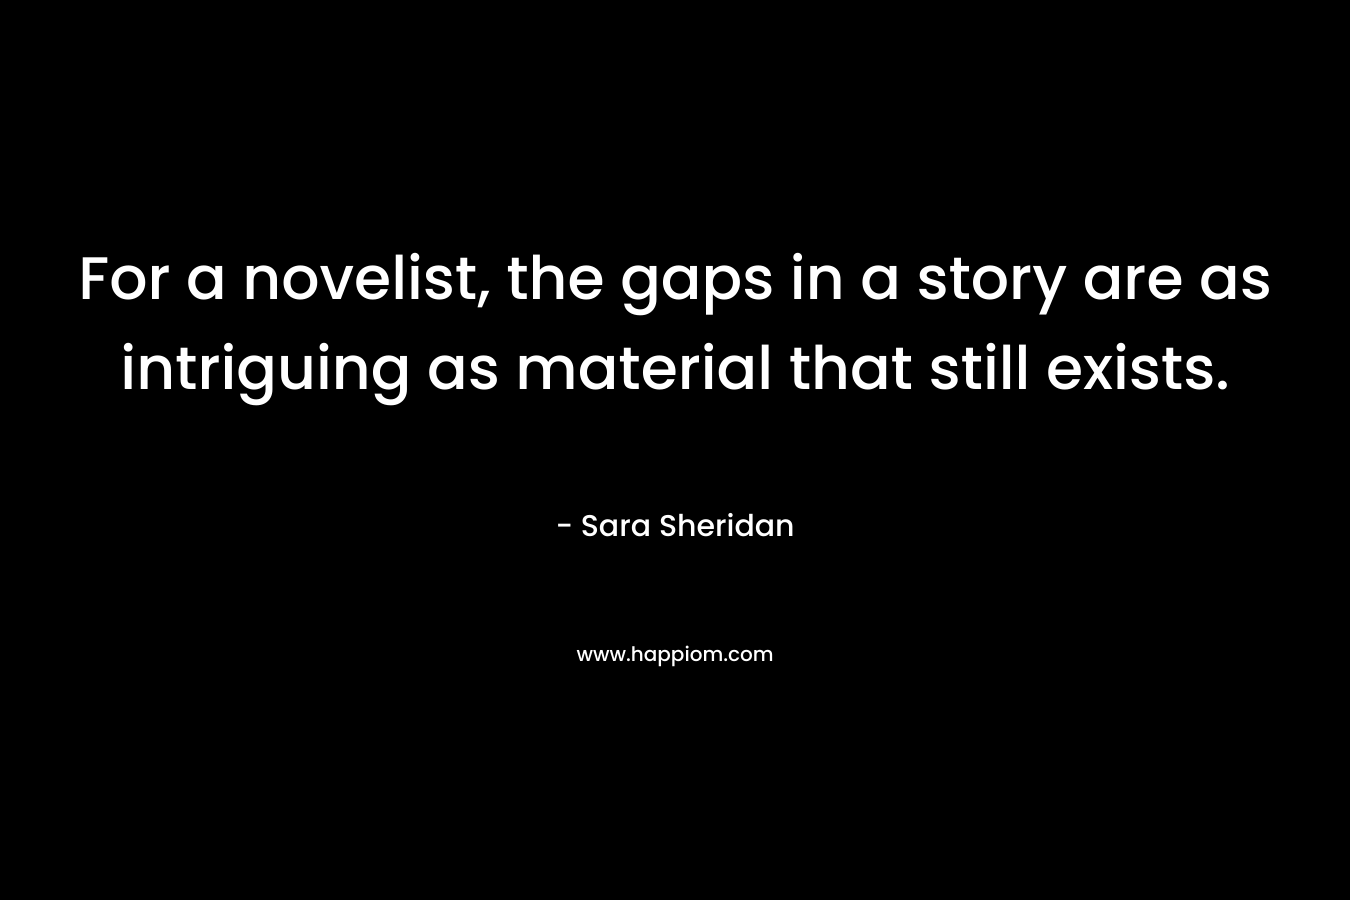 For a novelist, the gaps in a story are as intriguing as material that still exists. – Sara Sheridan